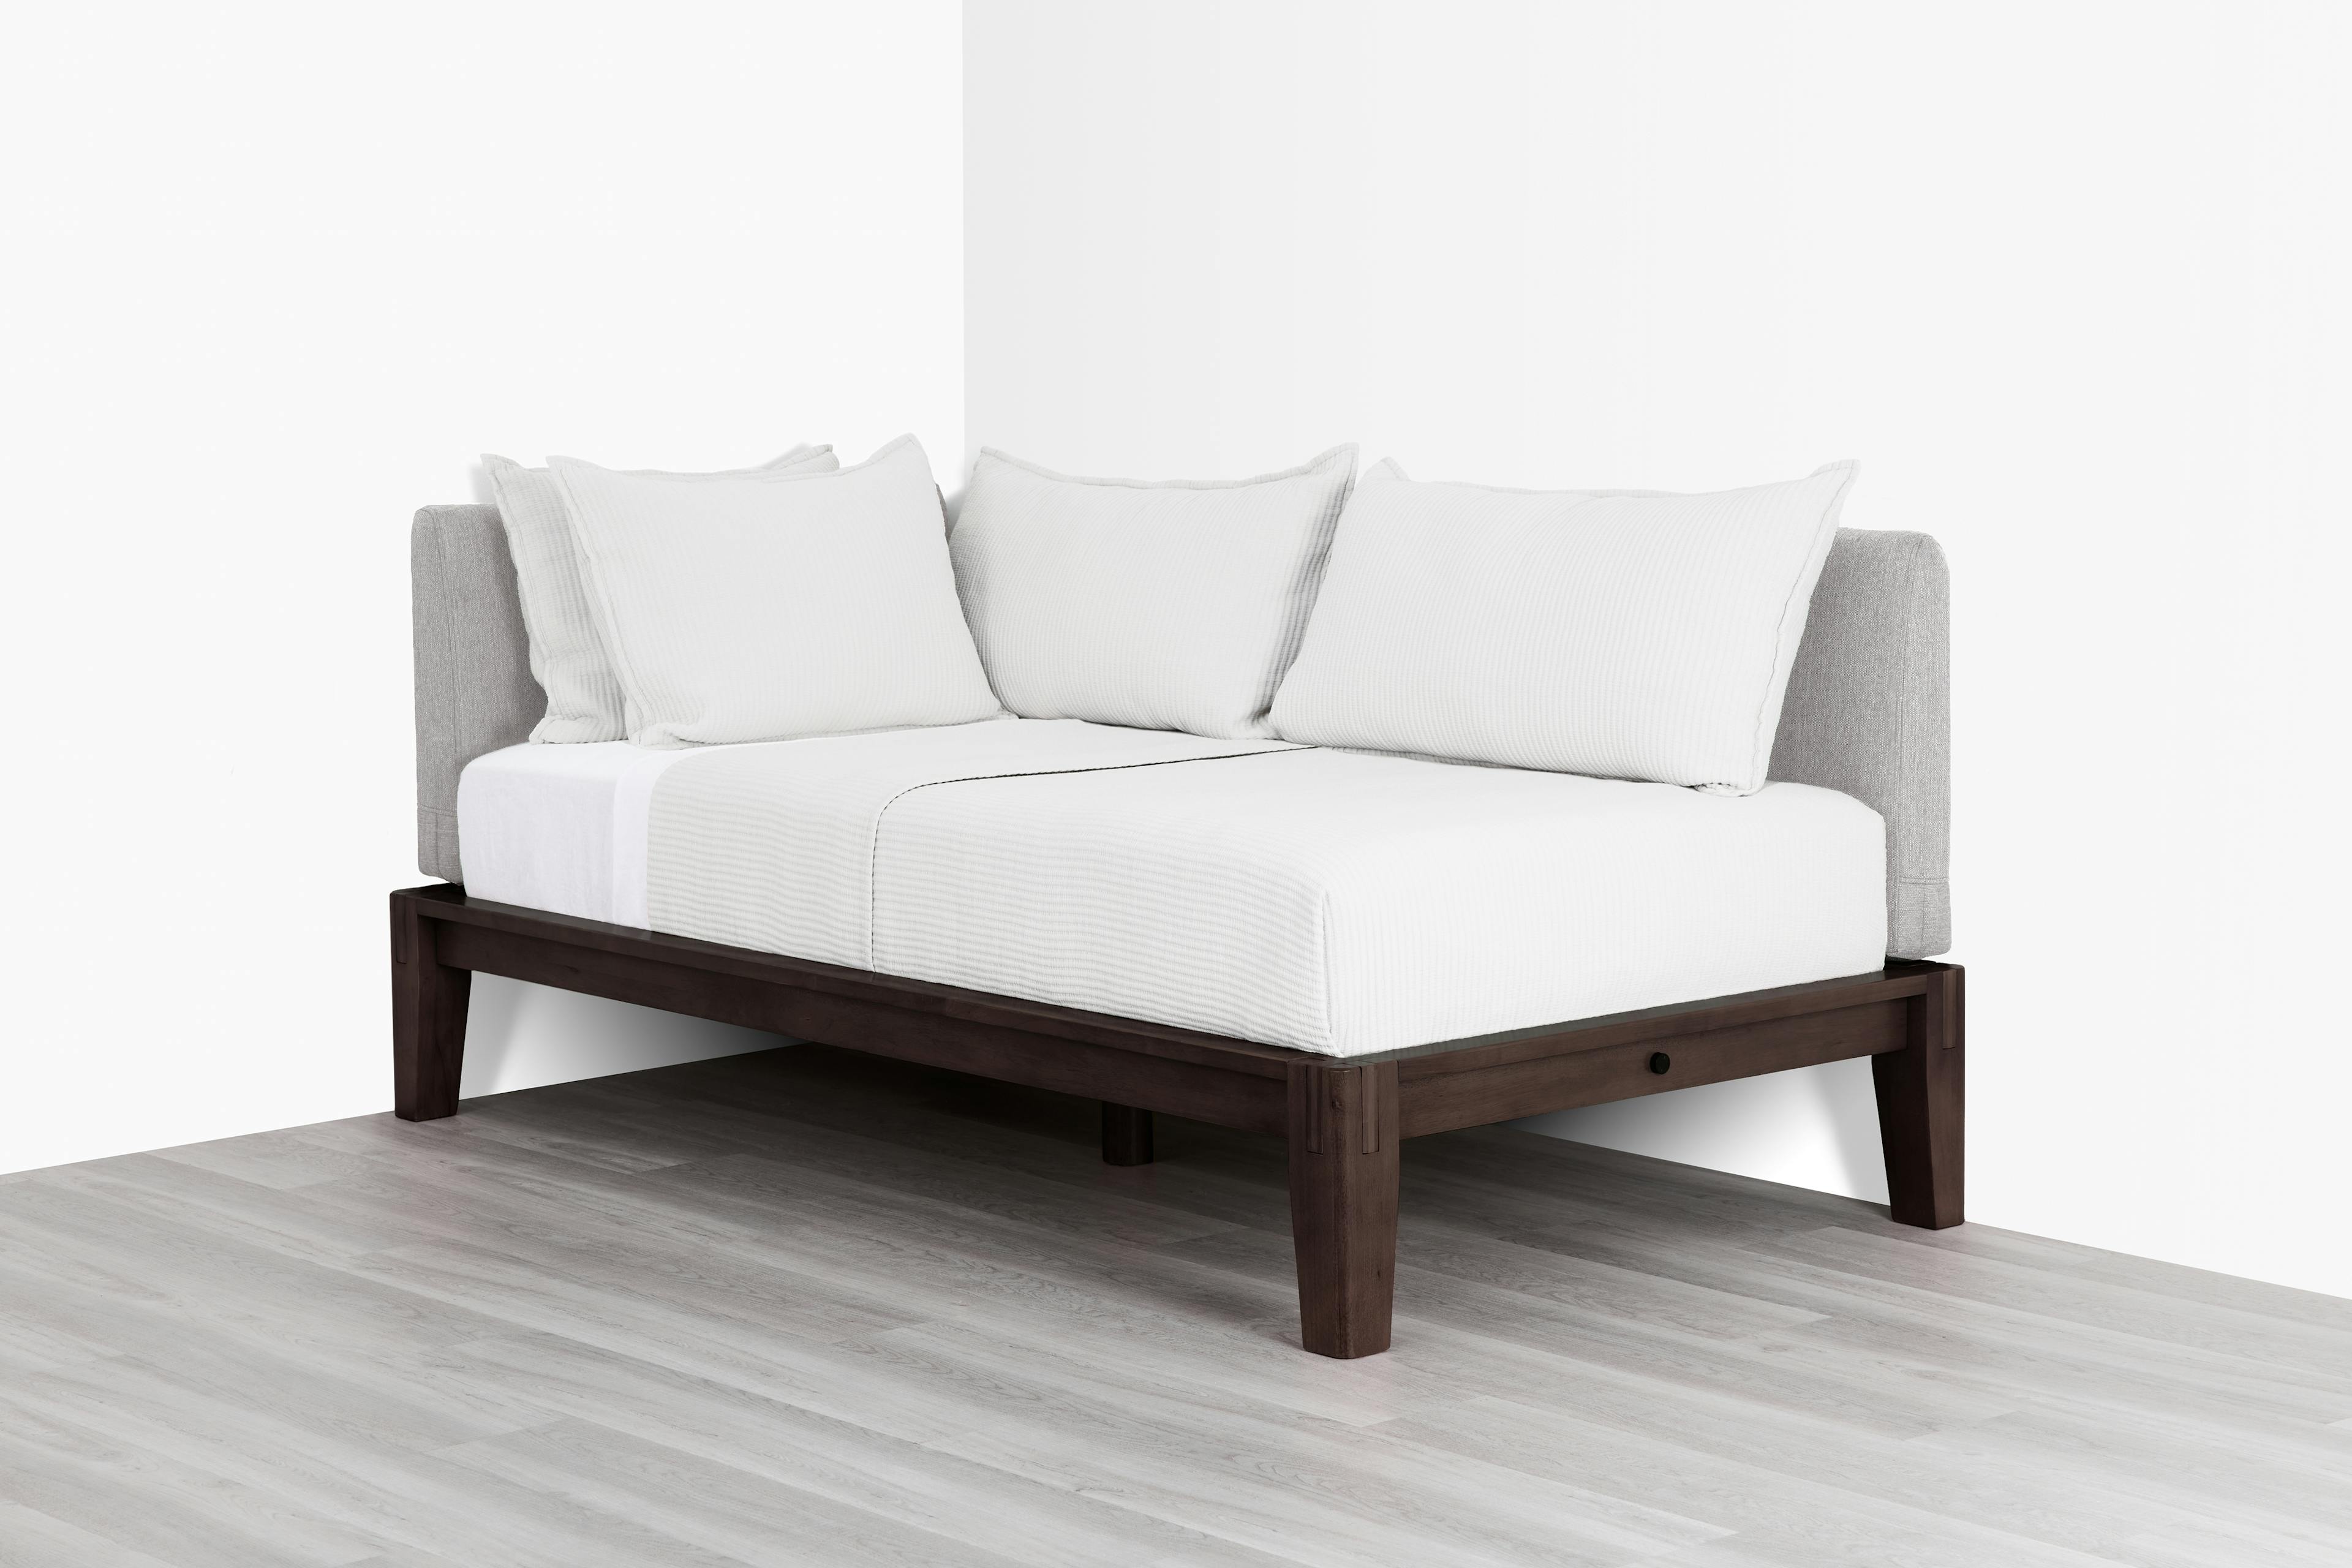 PDP Image: The Daybed (Espresso / Fog Grey) - 3:2 - Pillows